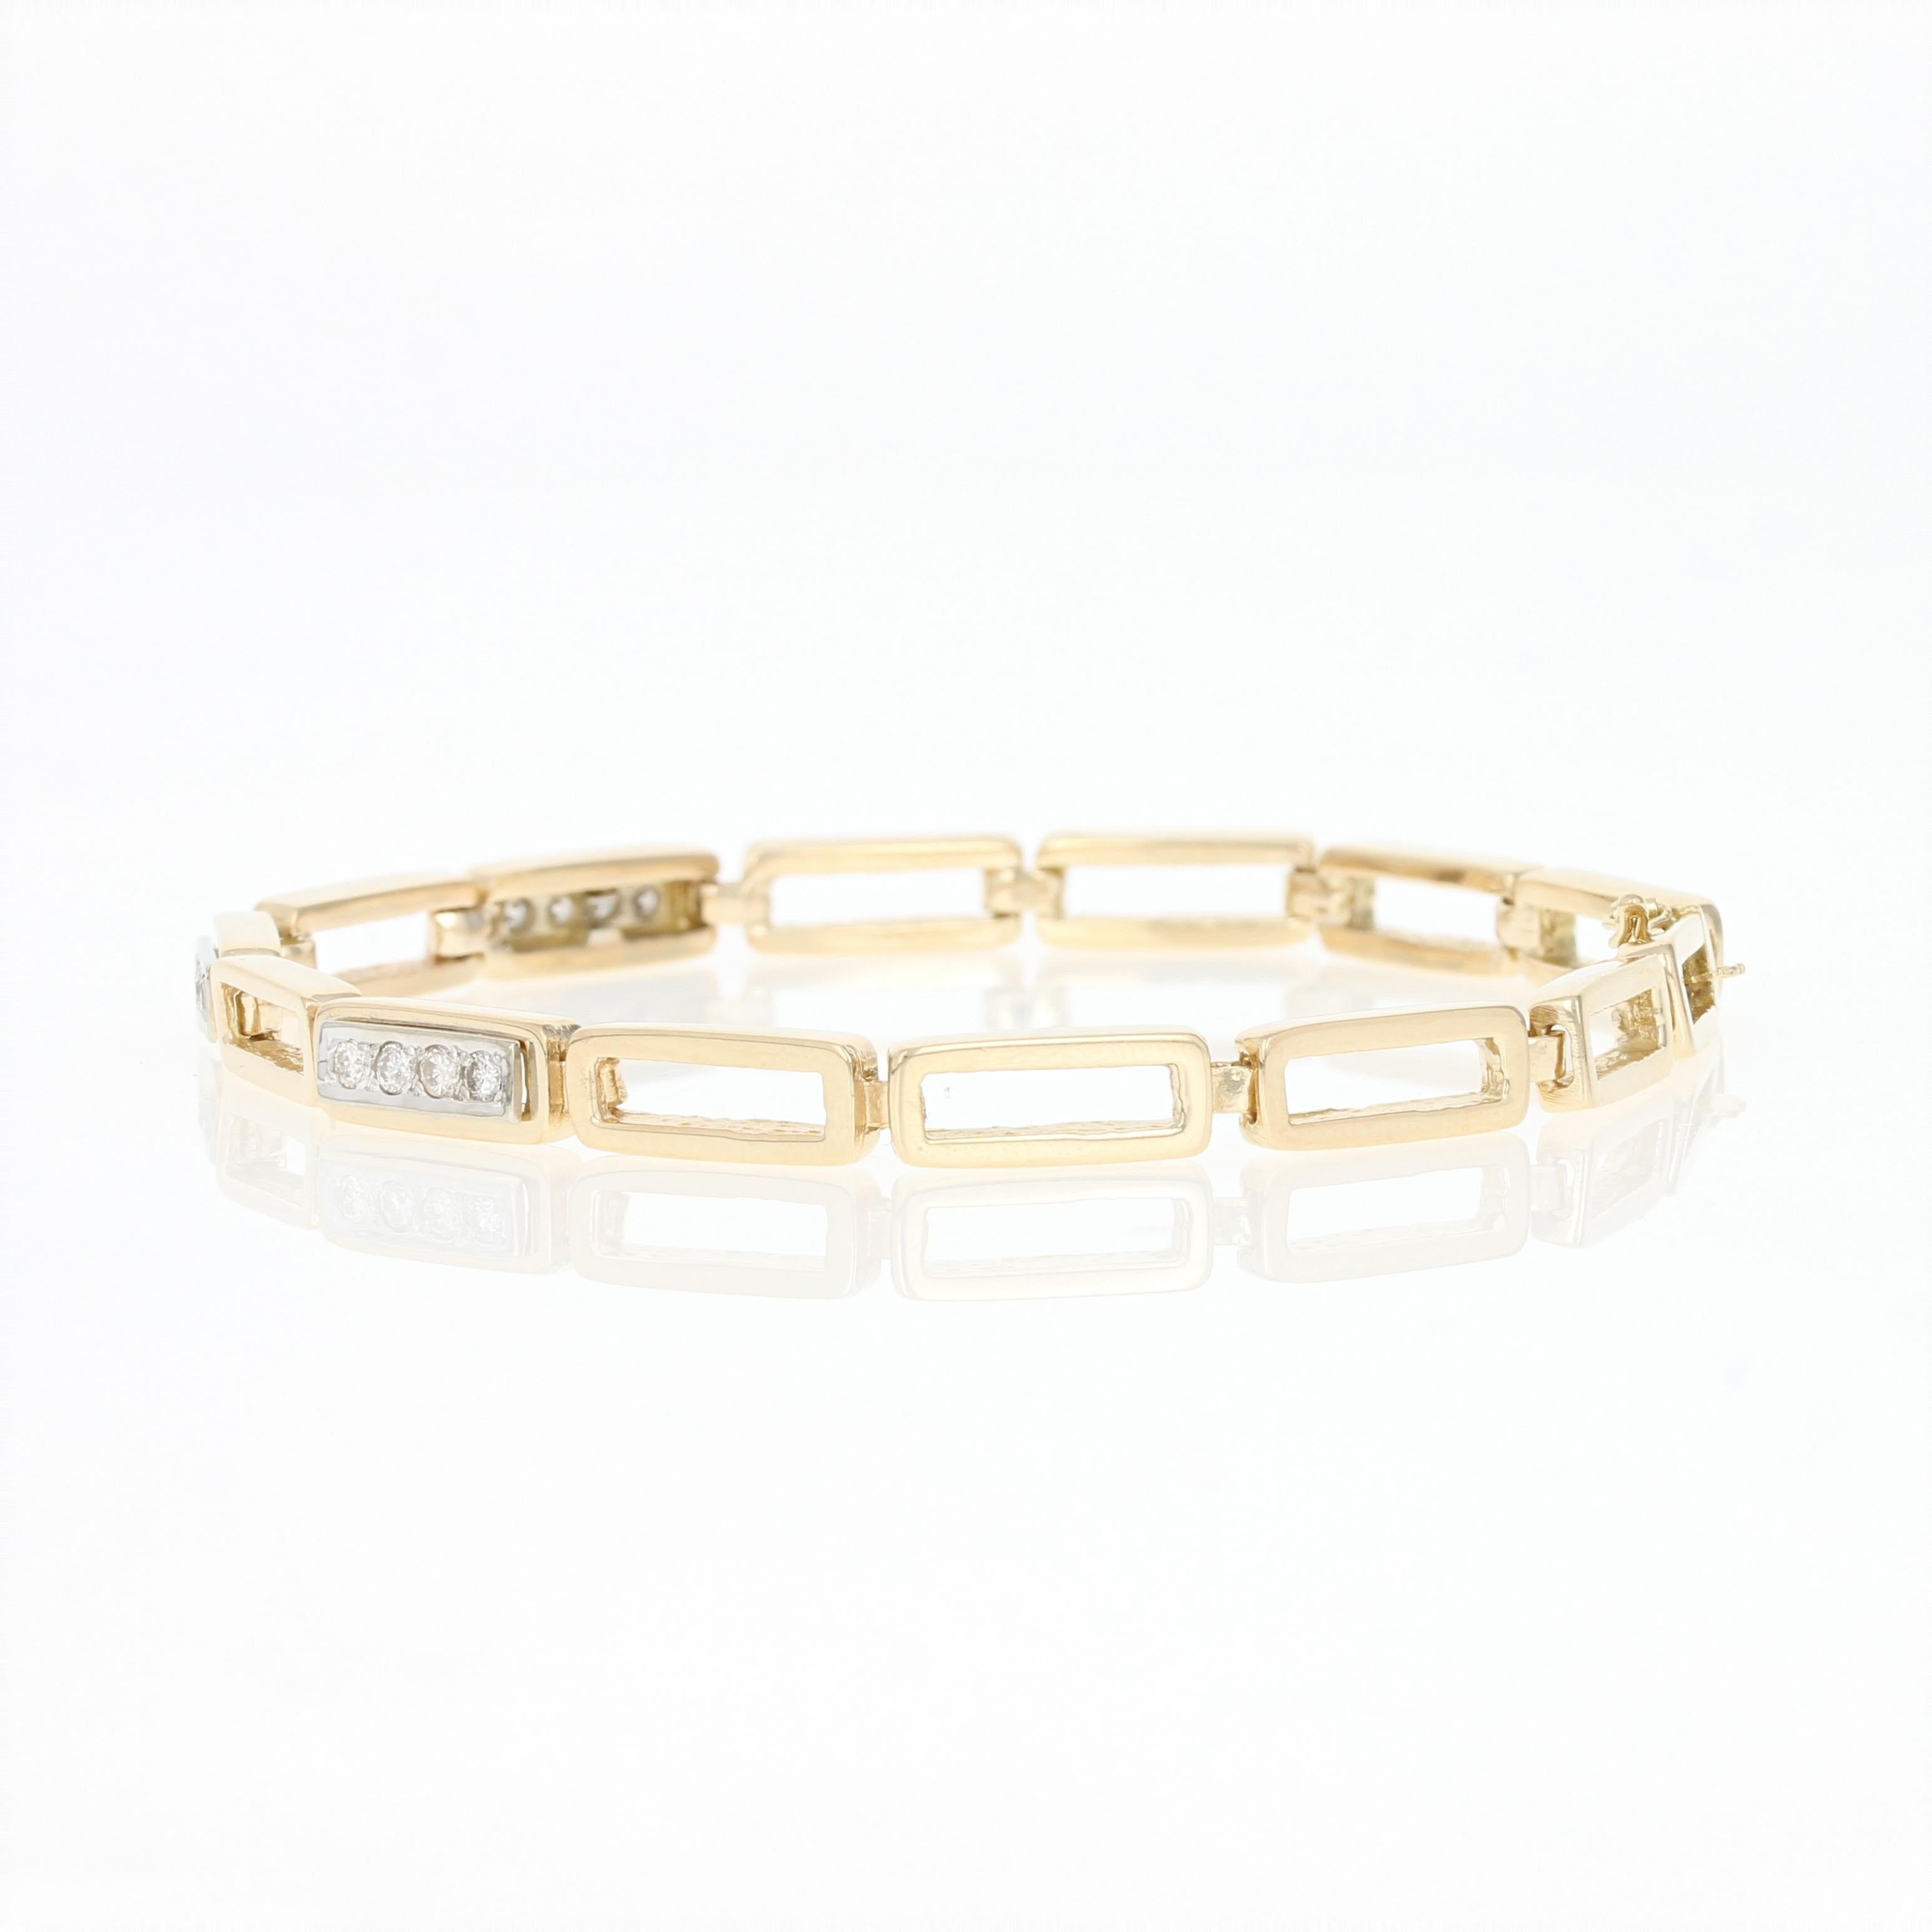 Featuring a sleek, contemporary silhouette, this 14k yellow gold bracelet showcases open cut rectangular-shaped links that are smoothly finished for a highly reflective shine. Set towards the center of the bracelet are three rows of sparkling